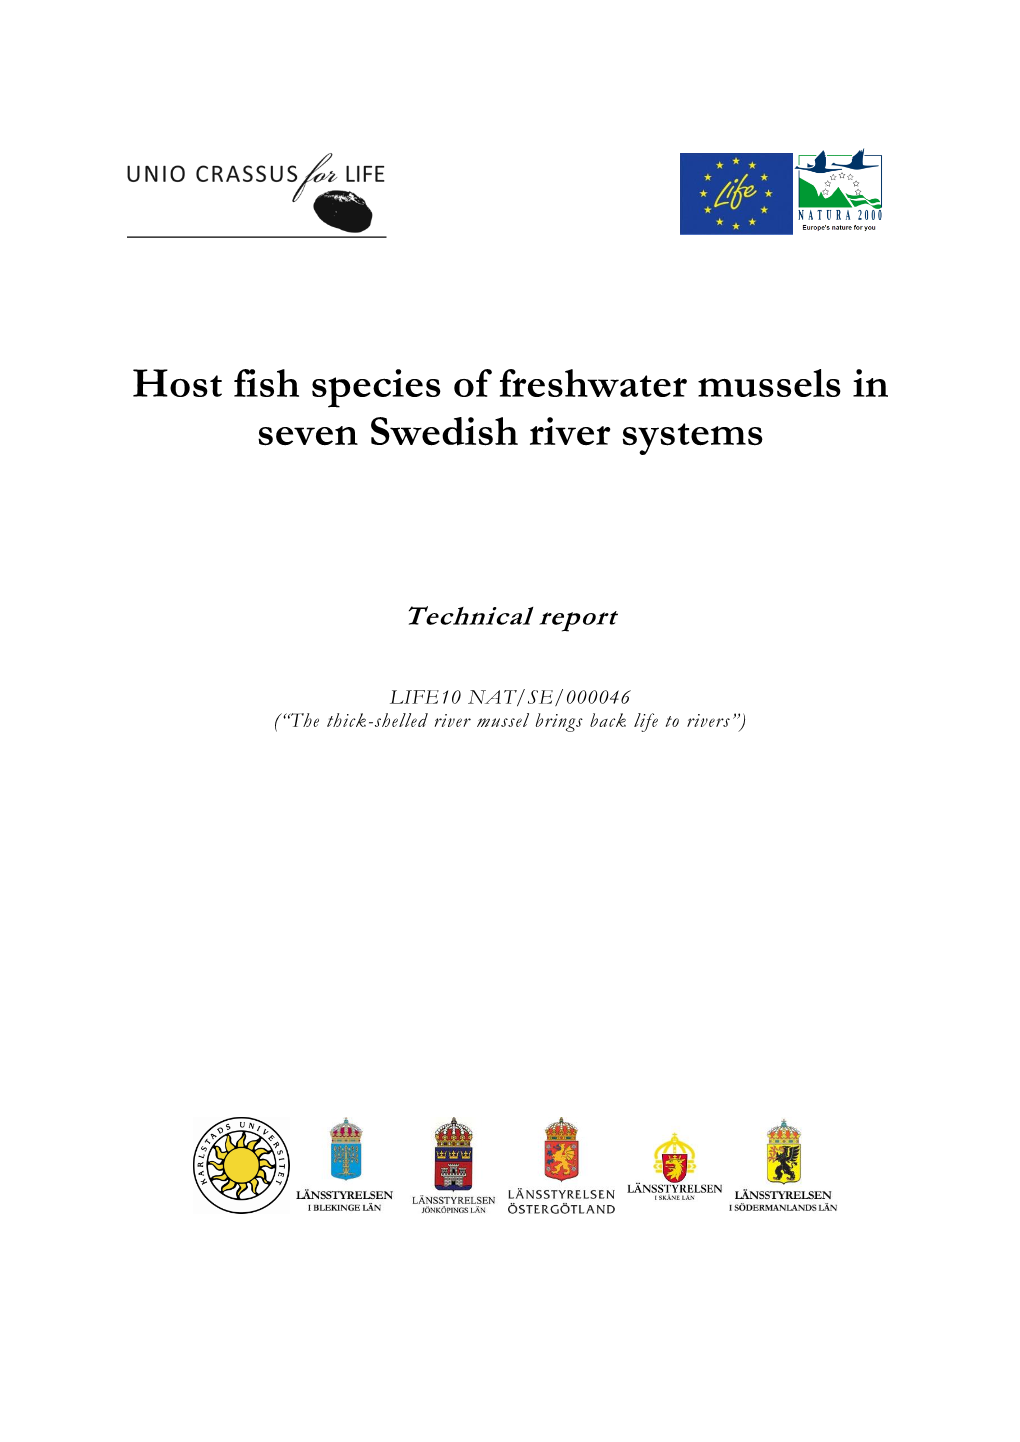 Host Fish Species of Freshwater Mussels in Seven Swedish River Systems